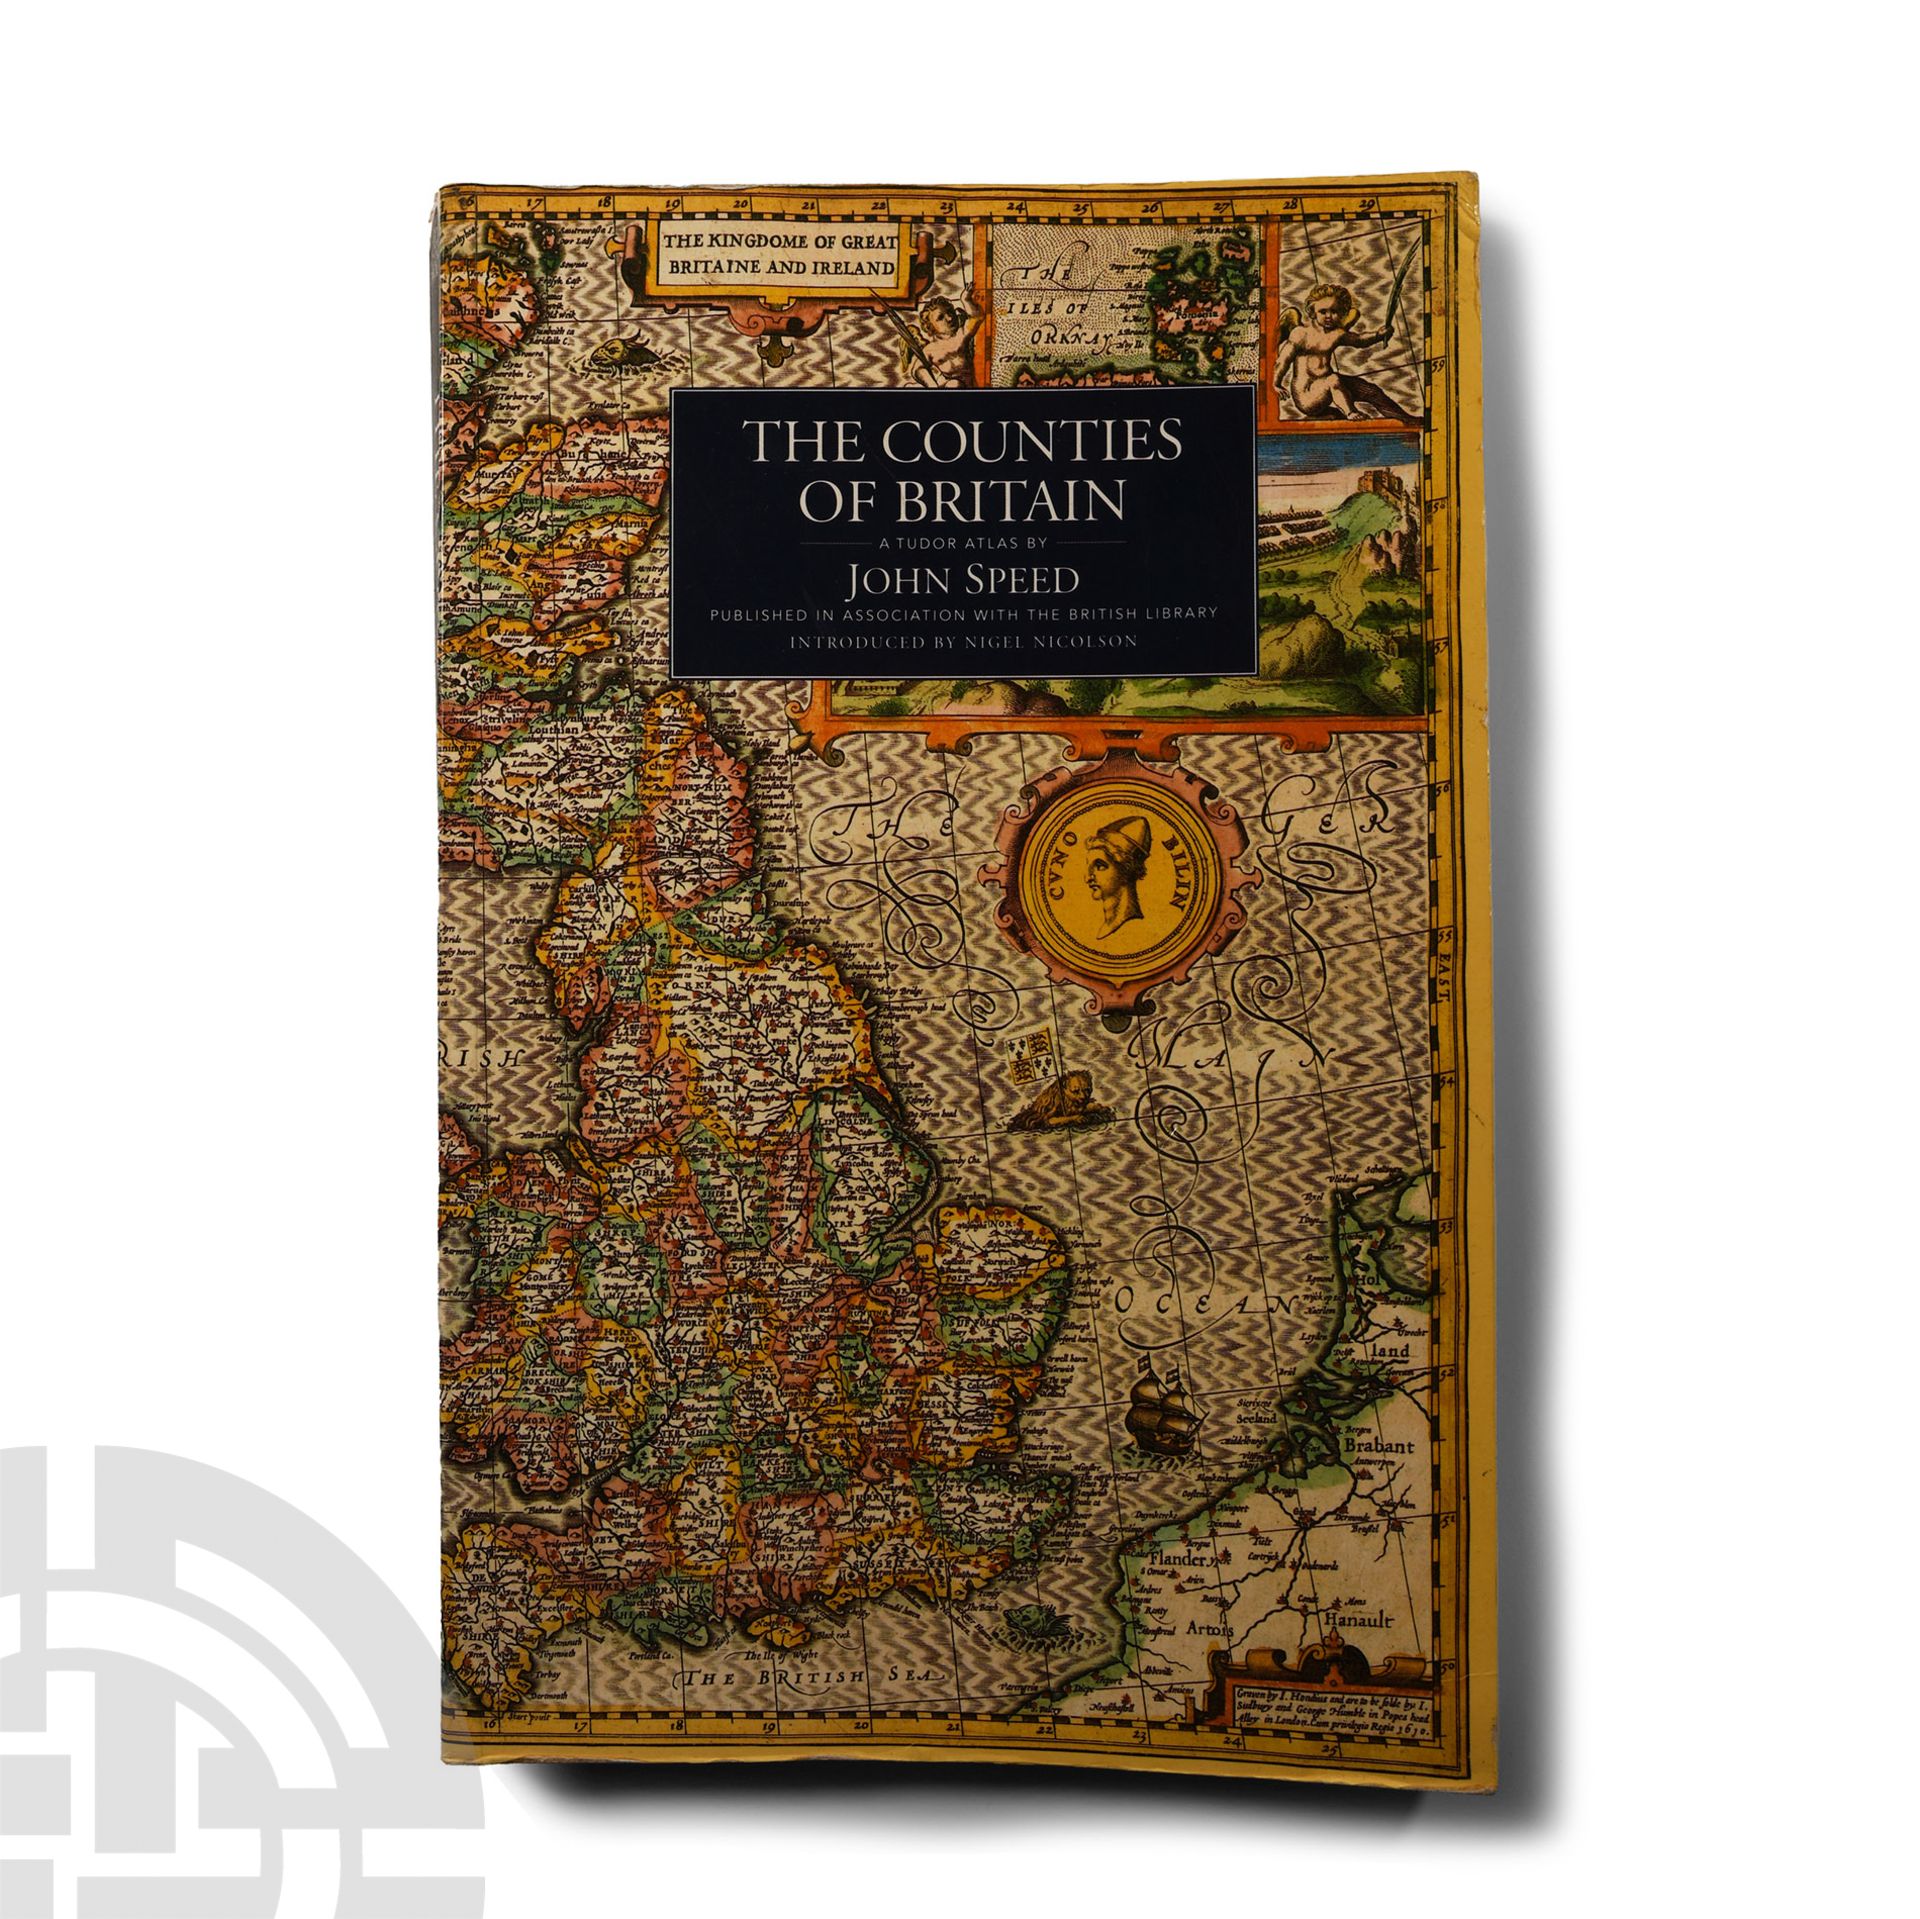 General Books - Nicolson - The Counties of Britain - A Tudor Atlas by John Speed